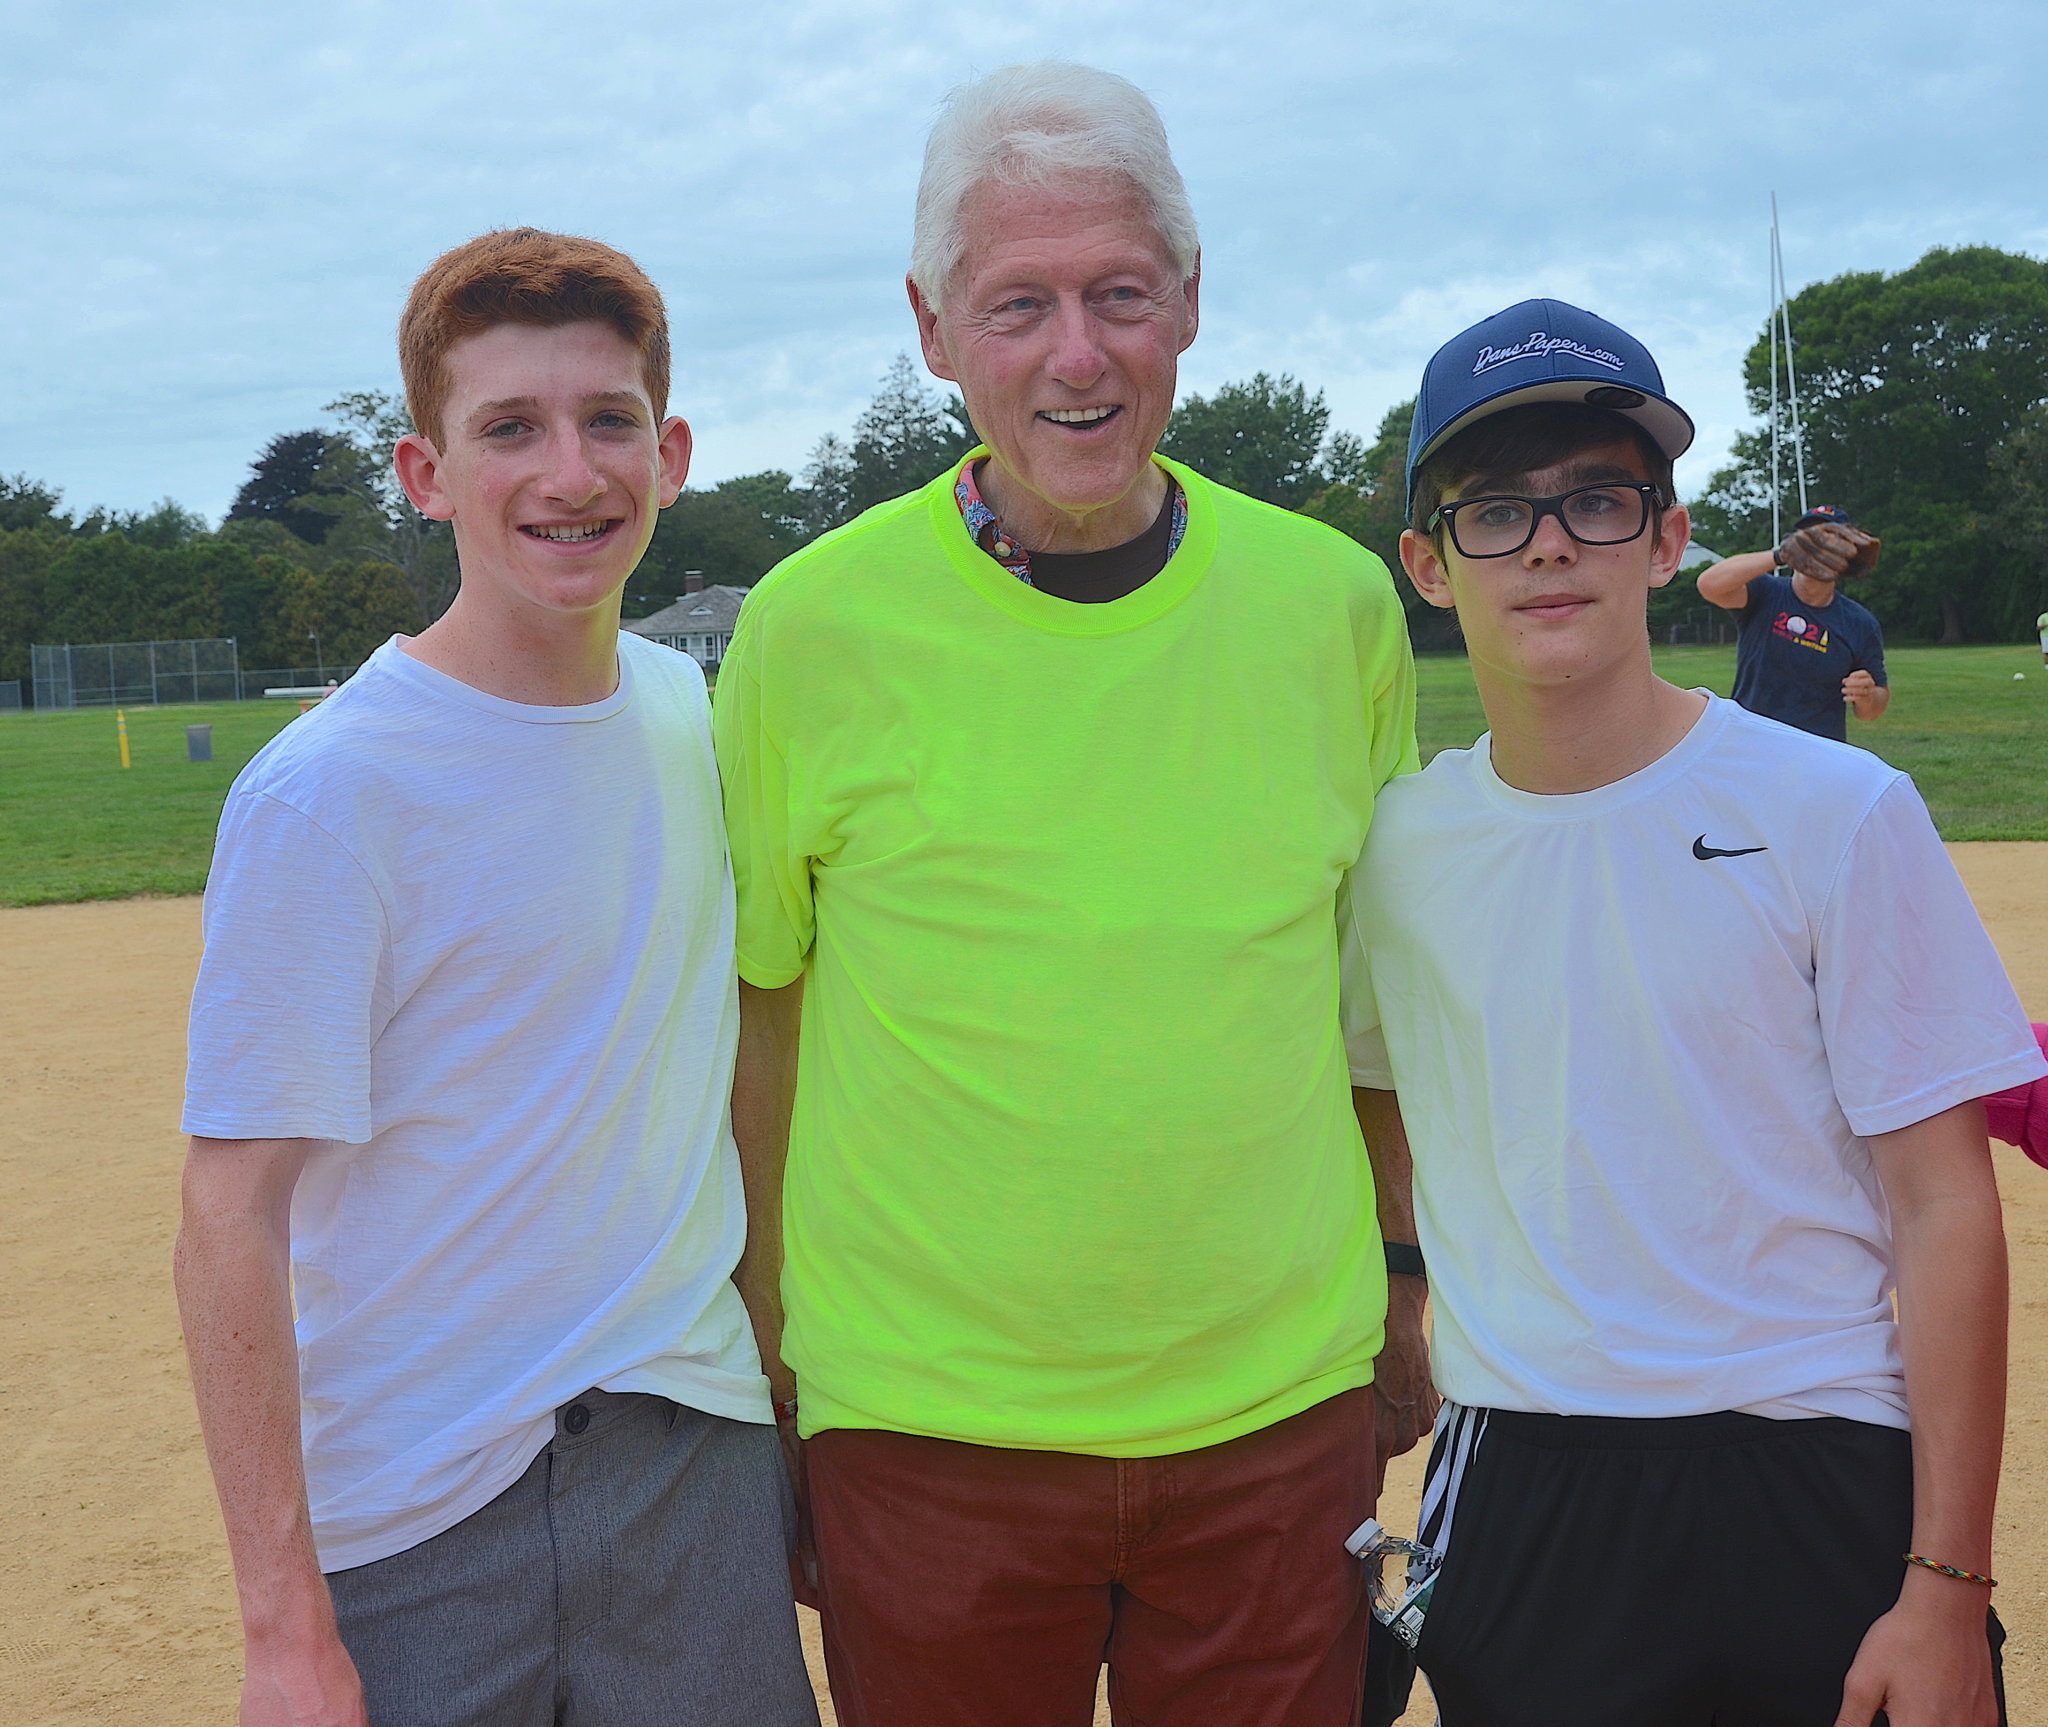 My grandkids Blake (l.) and Jonah (r.) met president Bill Clinton at the 2021 Artists & Writers Game